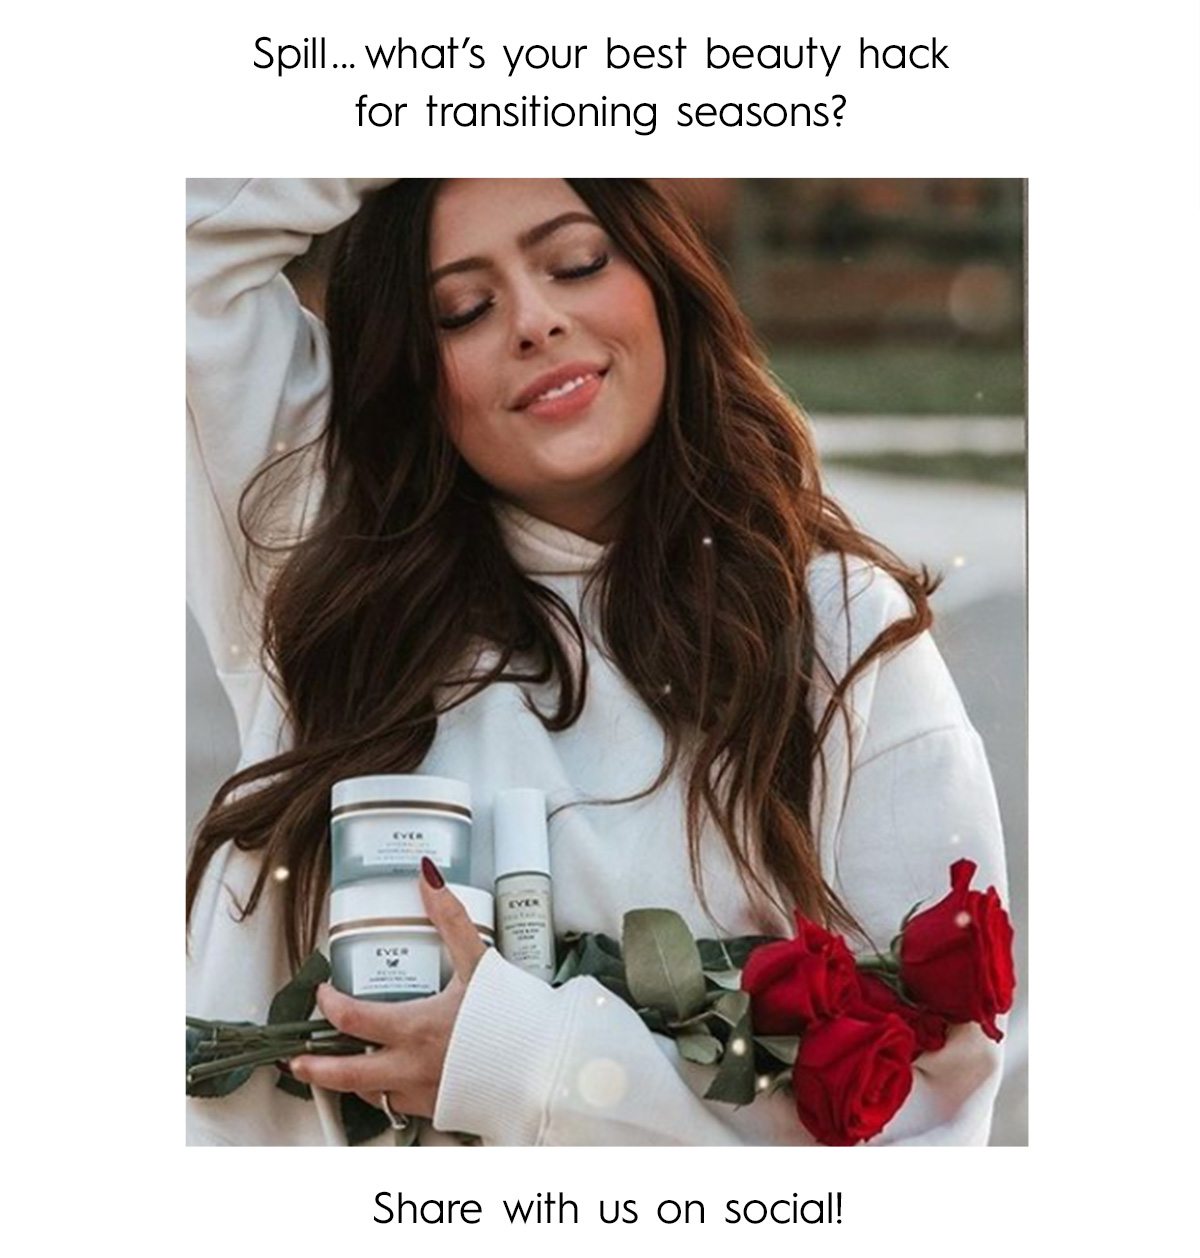 Spill... what’s your best beauty hack for transitioning seasons?